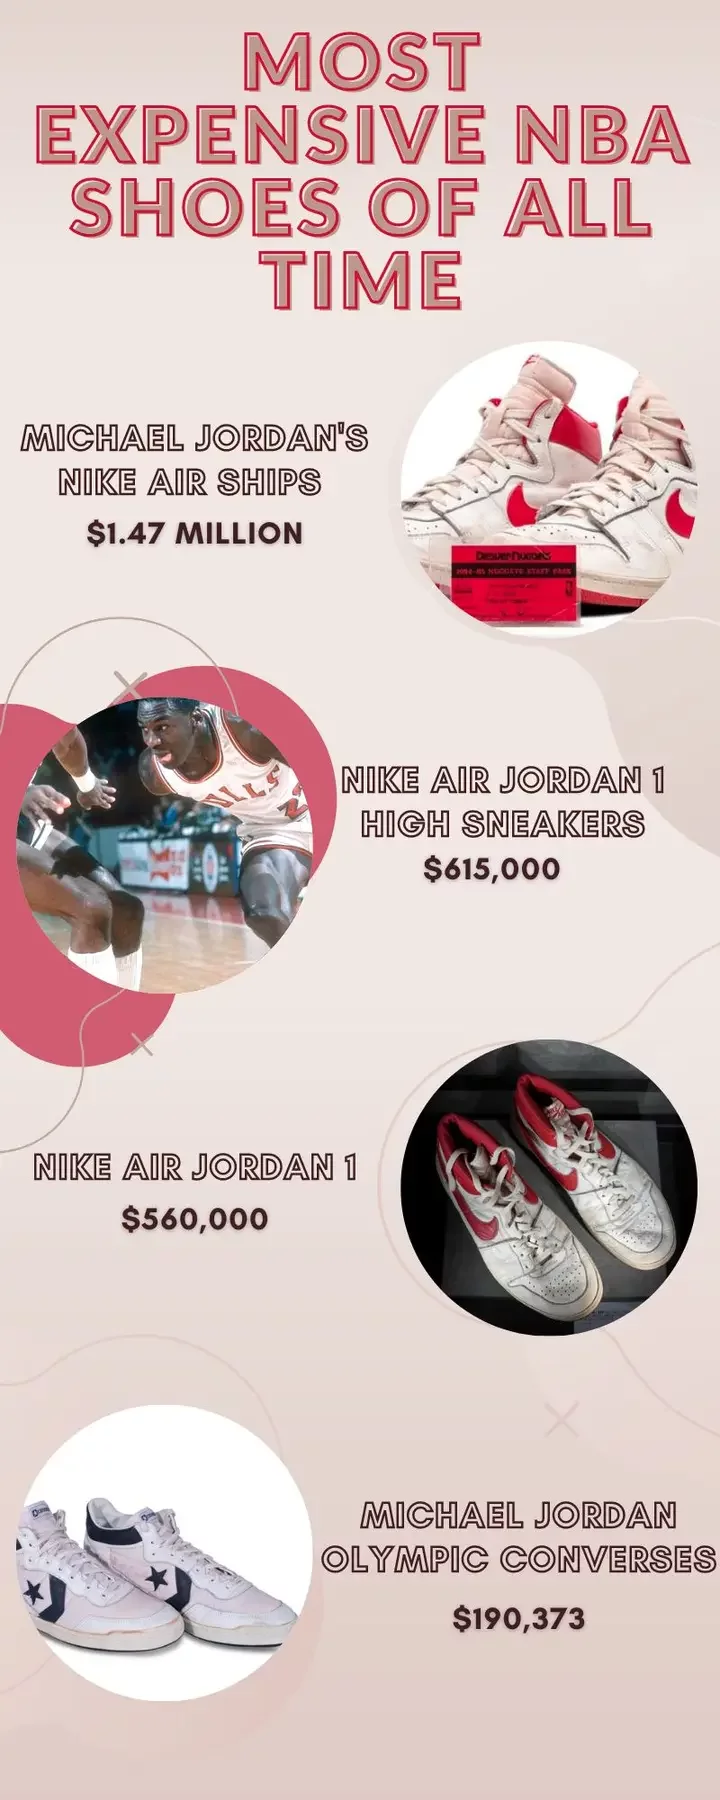 Ranking the 15 most expensive NBA shoes of all time